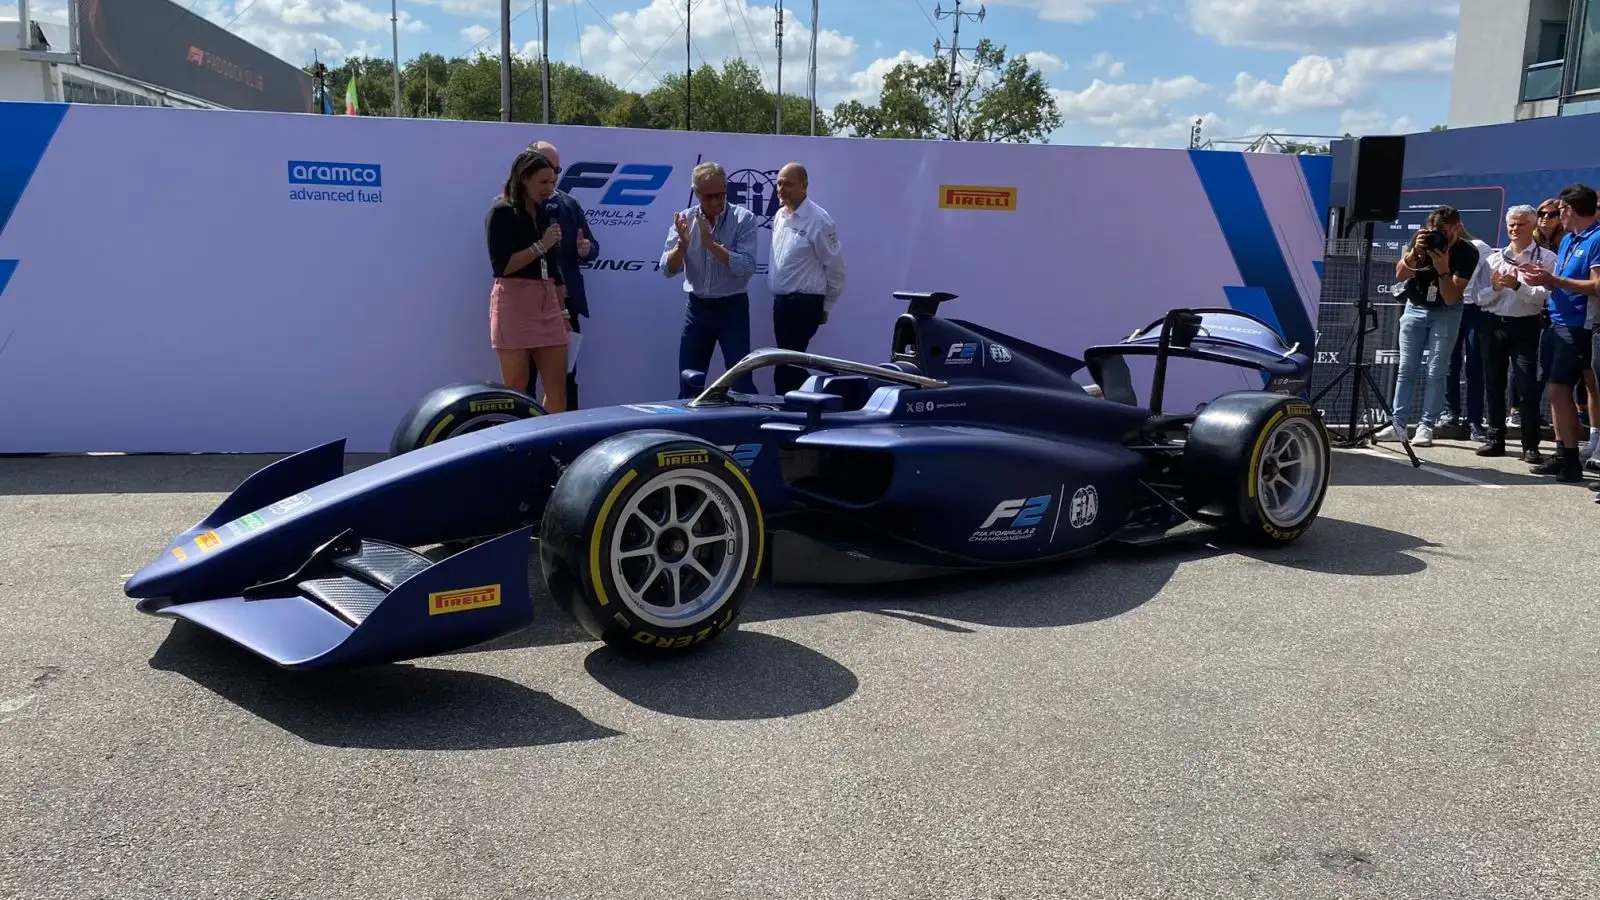 The new-look Formula 2 car for 2024 is revealed ahead of the Italian Grand Prix at Monza.